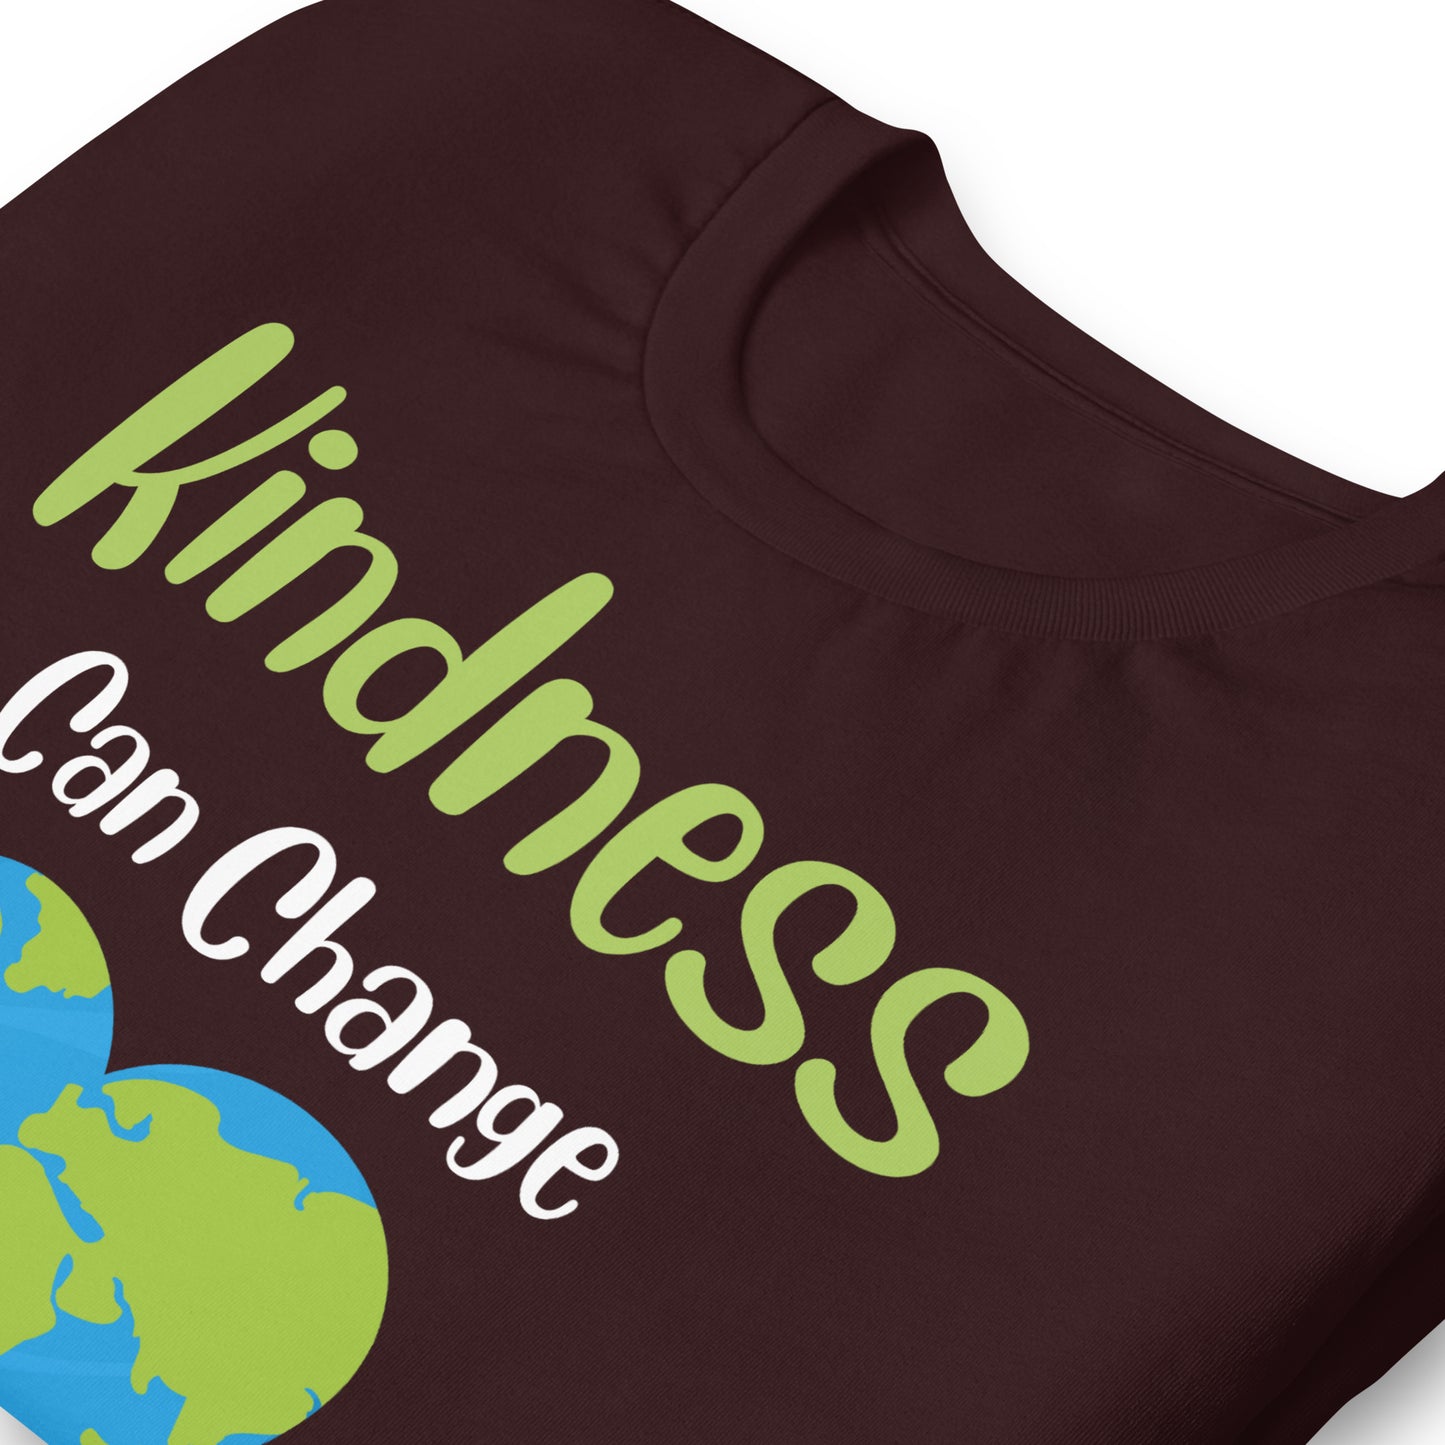 Kindness Can Change the World Quality Cotton Bella Canvas Adult T-Shirt